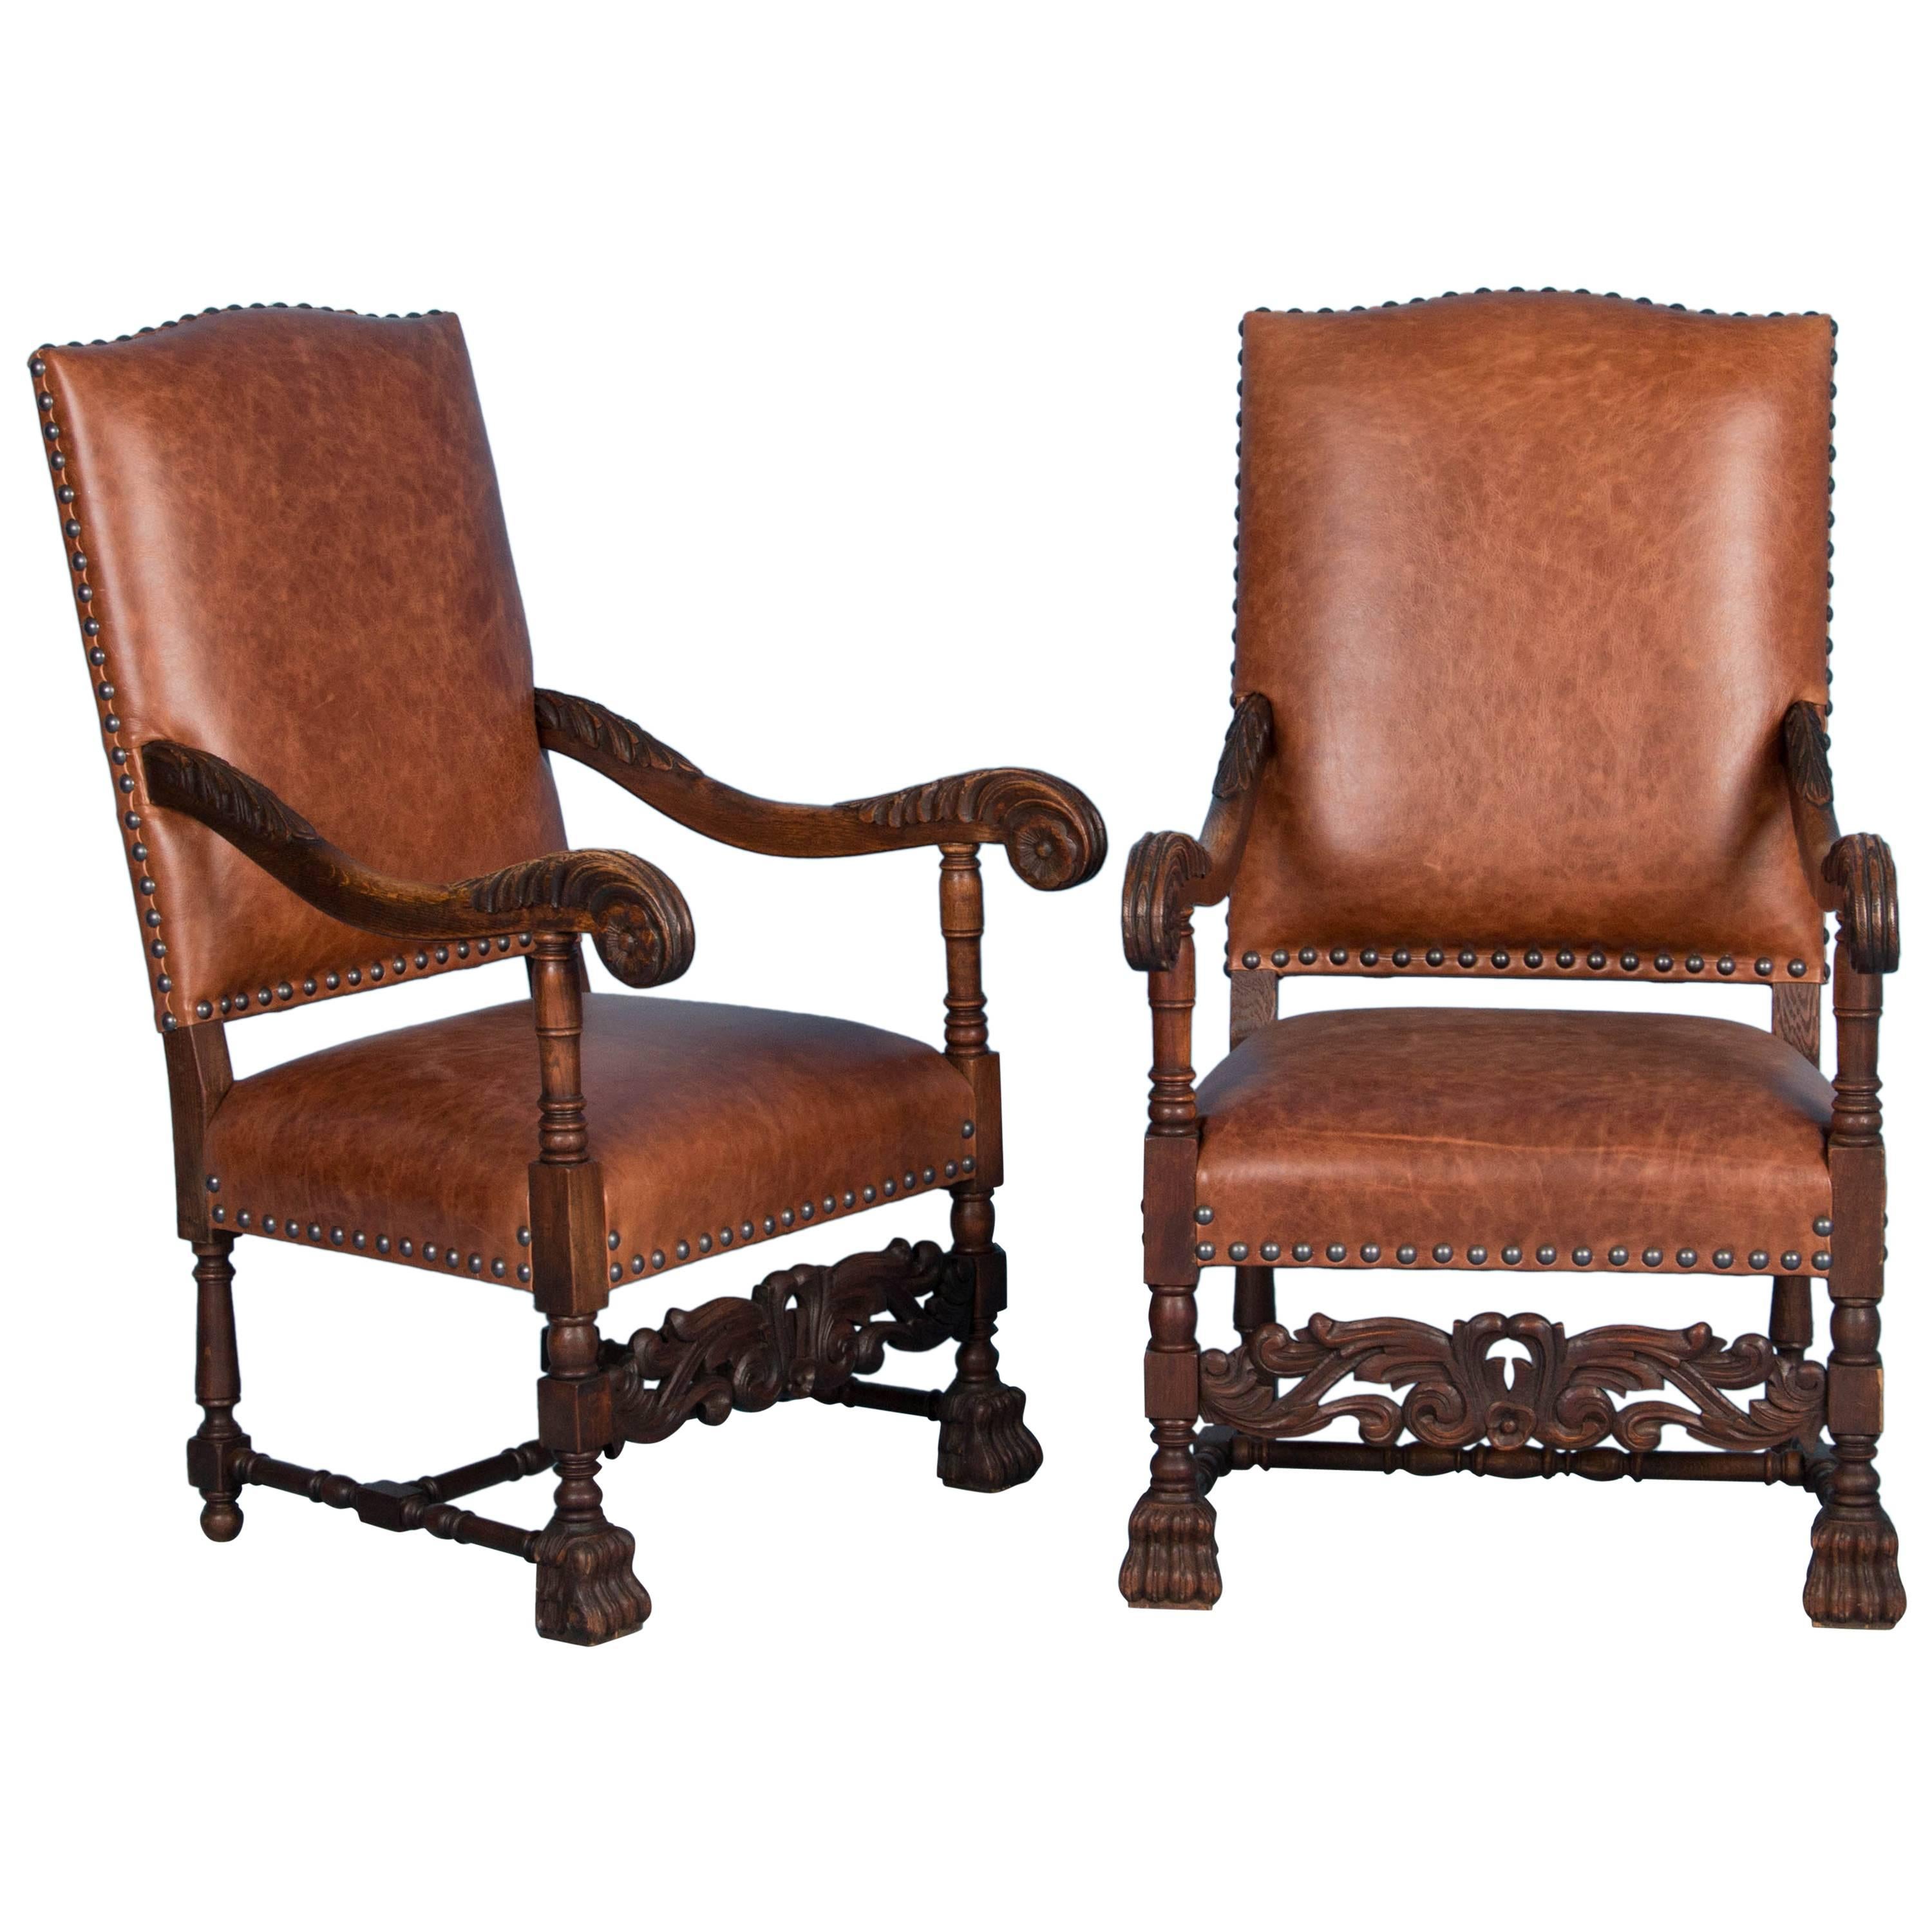 Pair, Antique Danish Baroque Armchairs Upholstered in Leather  